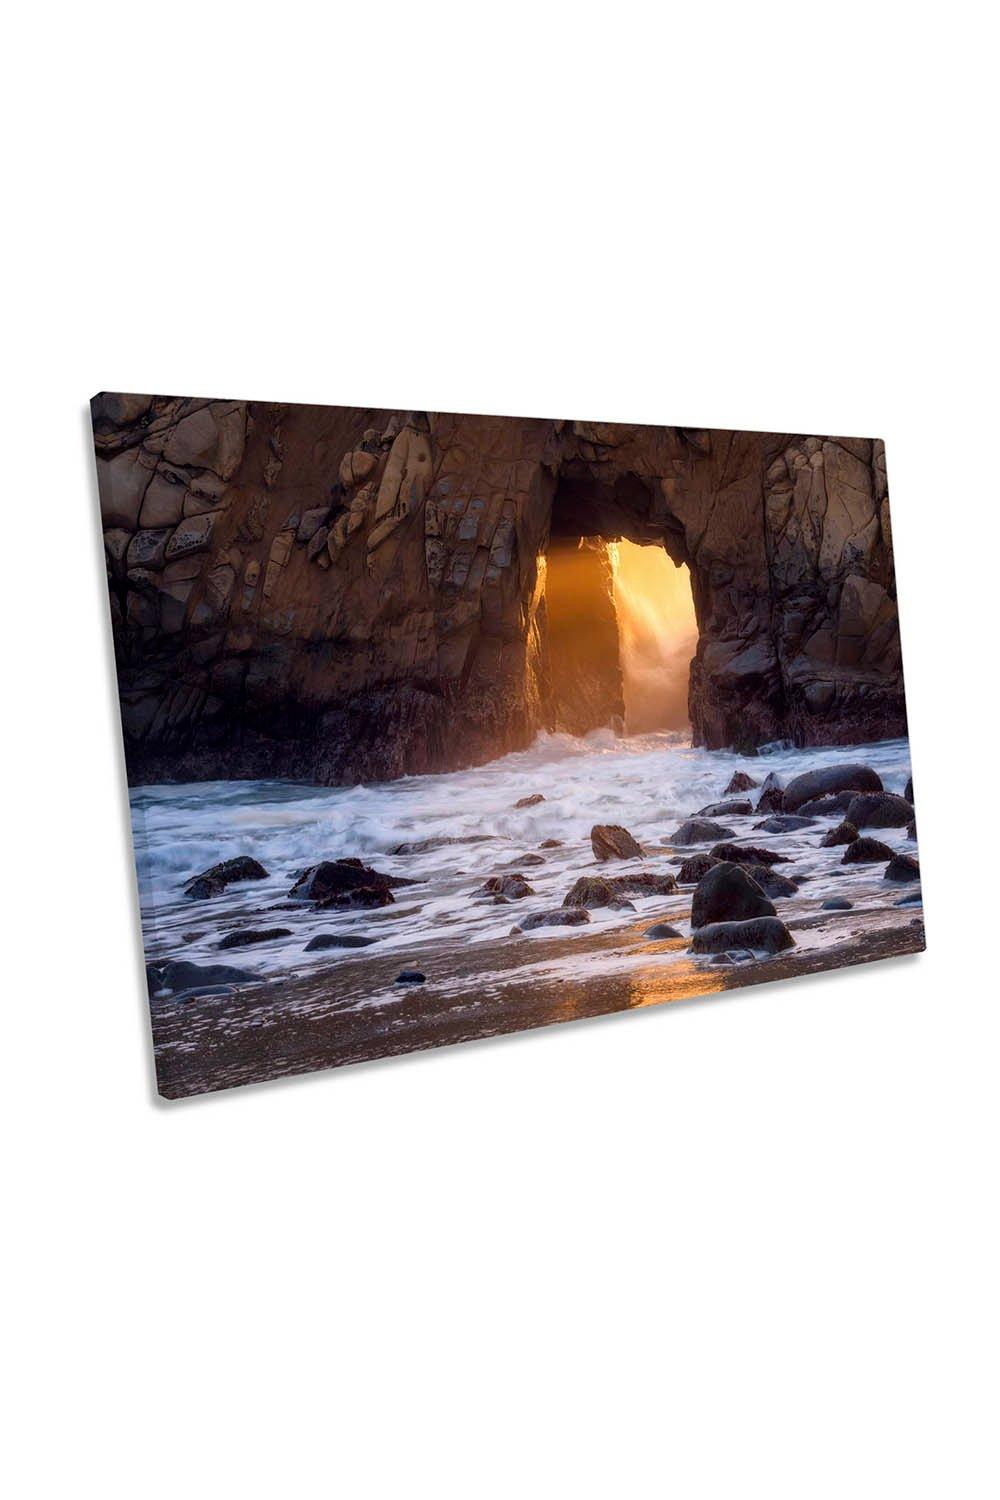 Fire in the Hole Beach Sunset Seascape Canvas Wall Art Picture Print